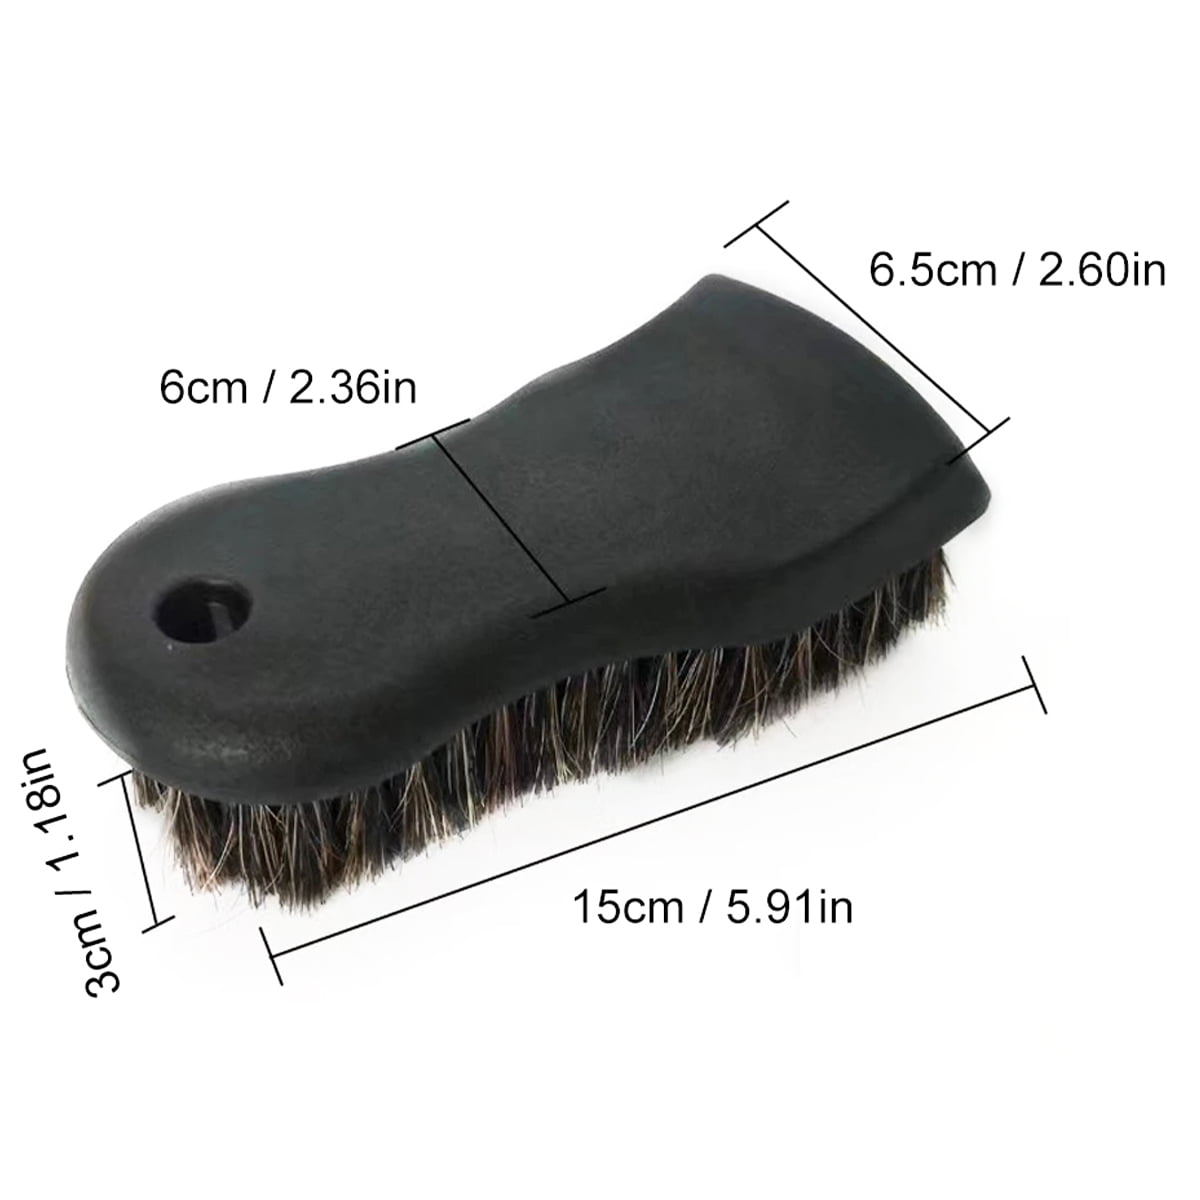 gvtocld Horse Hair Cleaning Brush Long Bristle Leather Cleaning Brush Premium Horse Hair Interior Brush Soft Car Cleaning Brush Horse Hair Bristle with